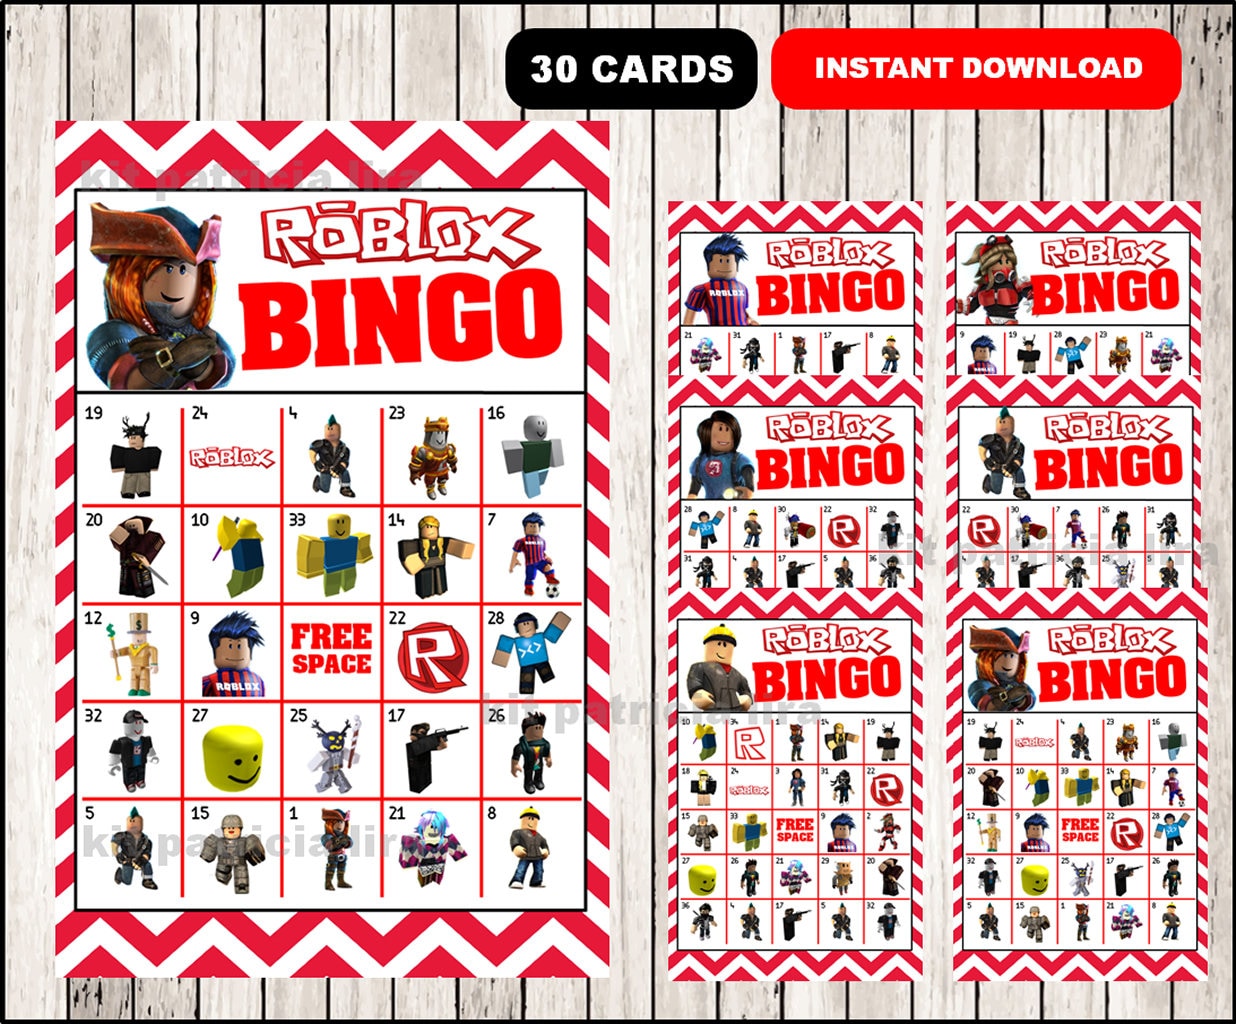 Roblox Bingo Game - Printable - 30 different Cards - Party Game Printable -  Half Page Size - INSTANT DOWNLOAD - 